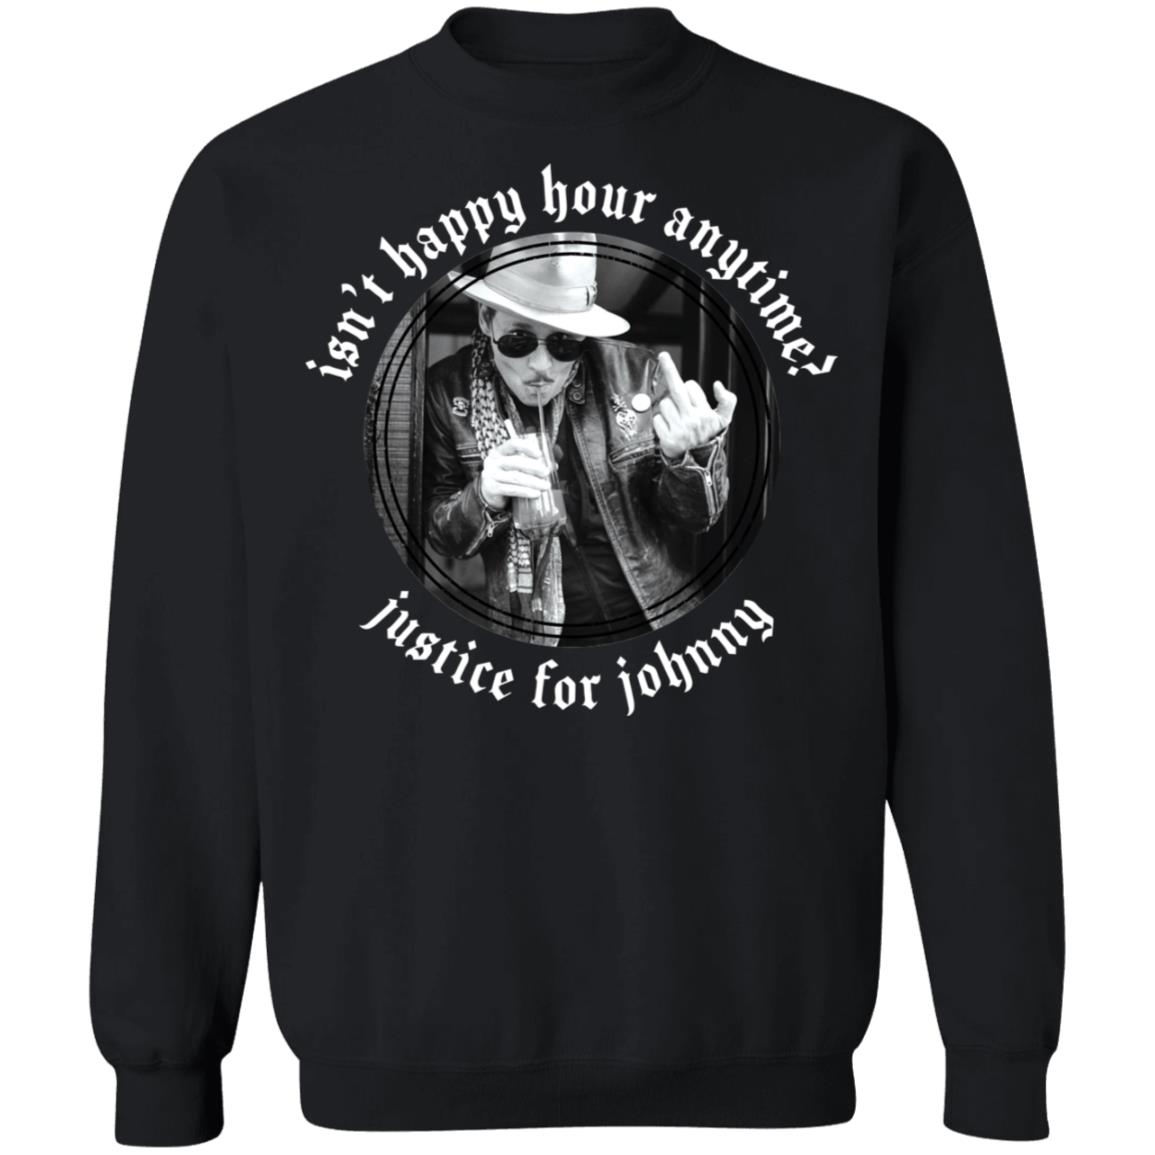 Isn’t Happy Hour Anytime Justice For Johnny Deep Shirt 1